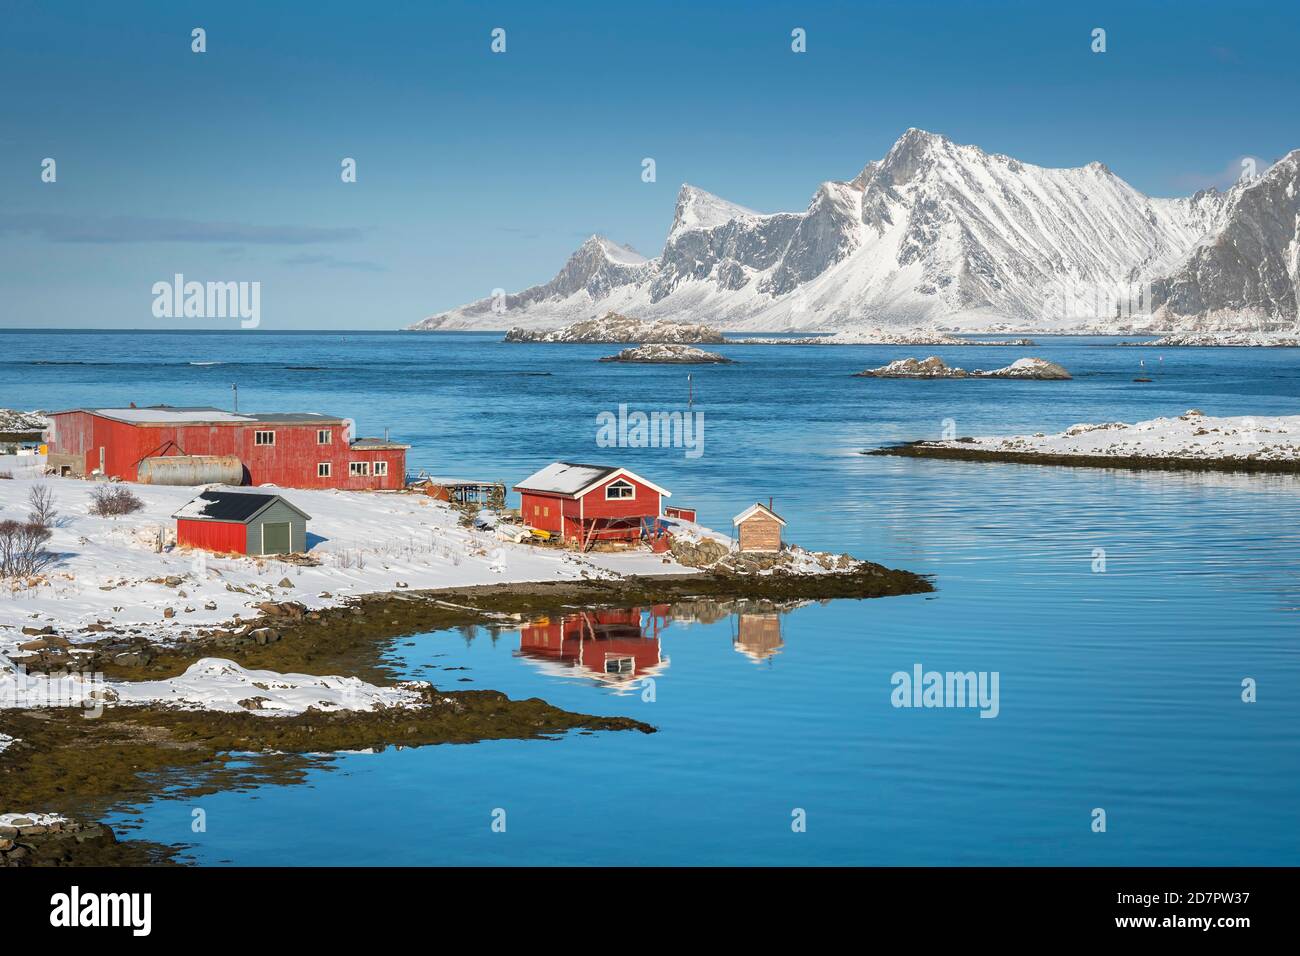 Red farmhouse reflected in the fjord Rossoy Straumen, in the back far ocean, snowy mountains Hustinden and Bjoerntinden, Nordland, Lofoten, Norway Stock Photo